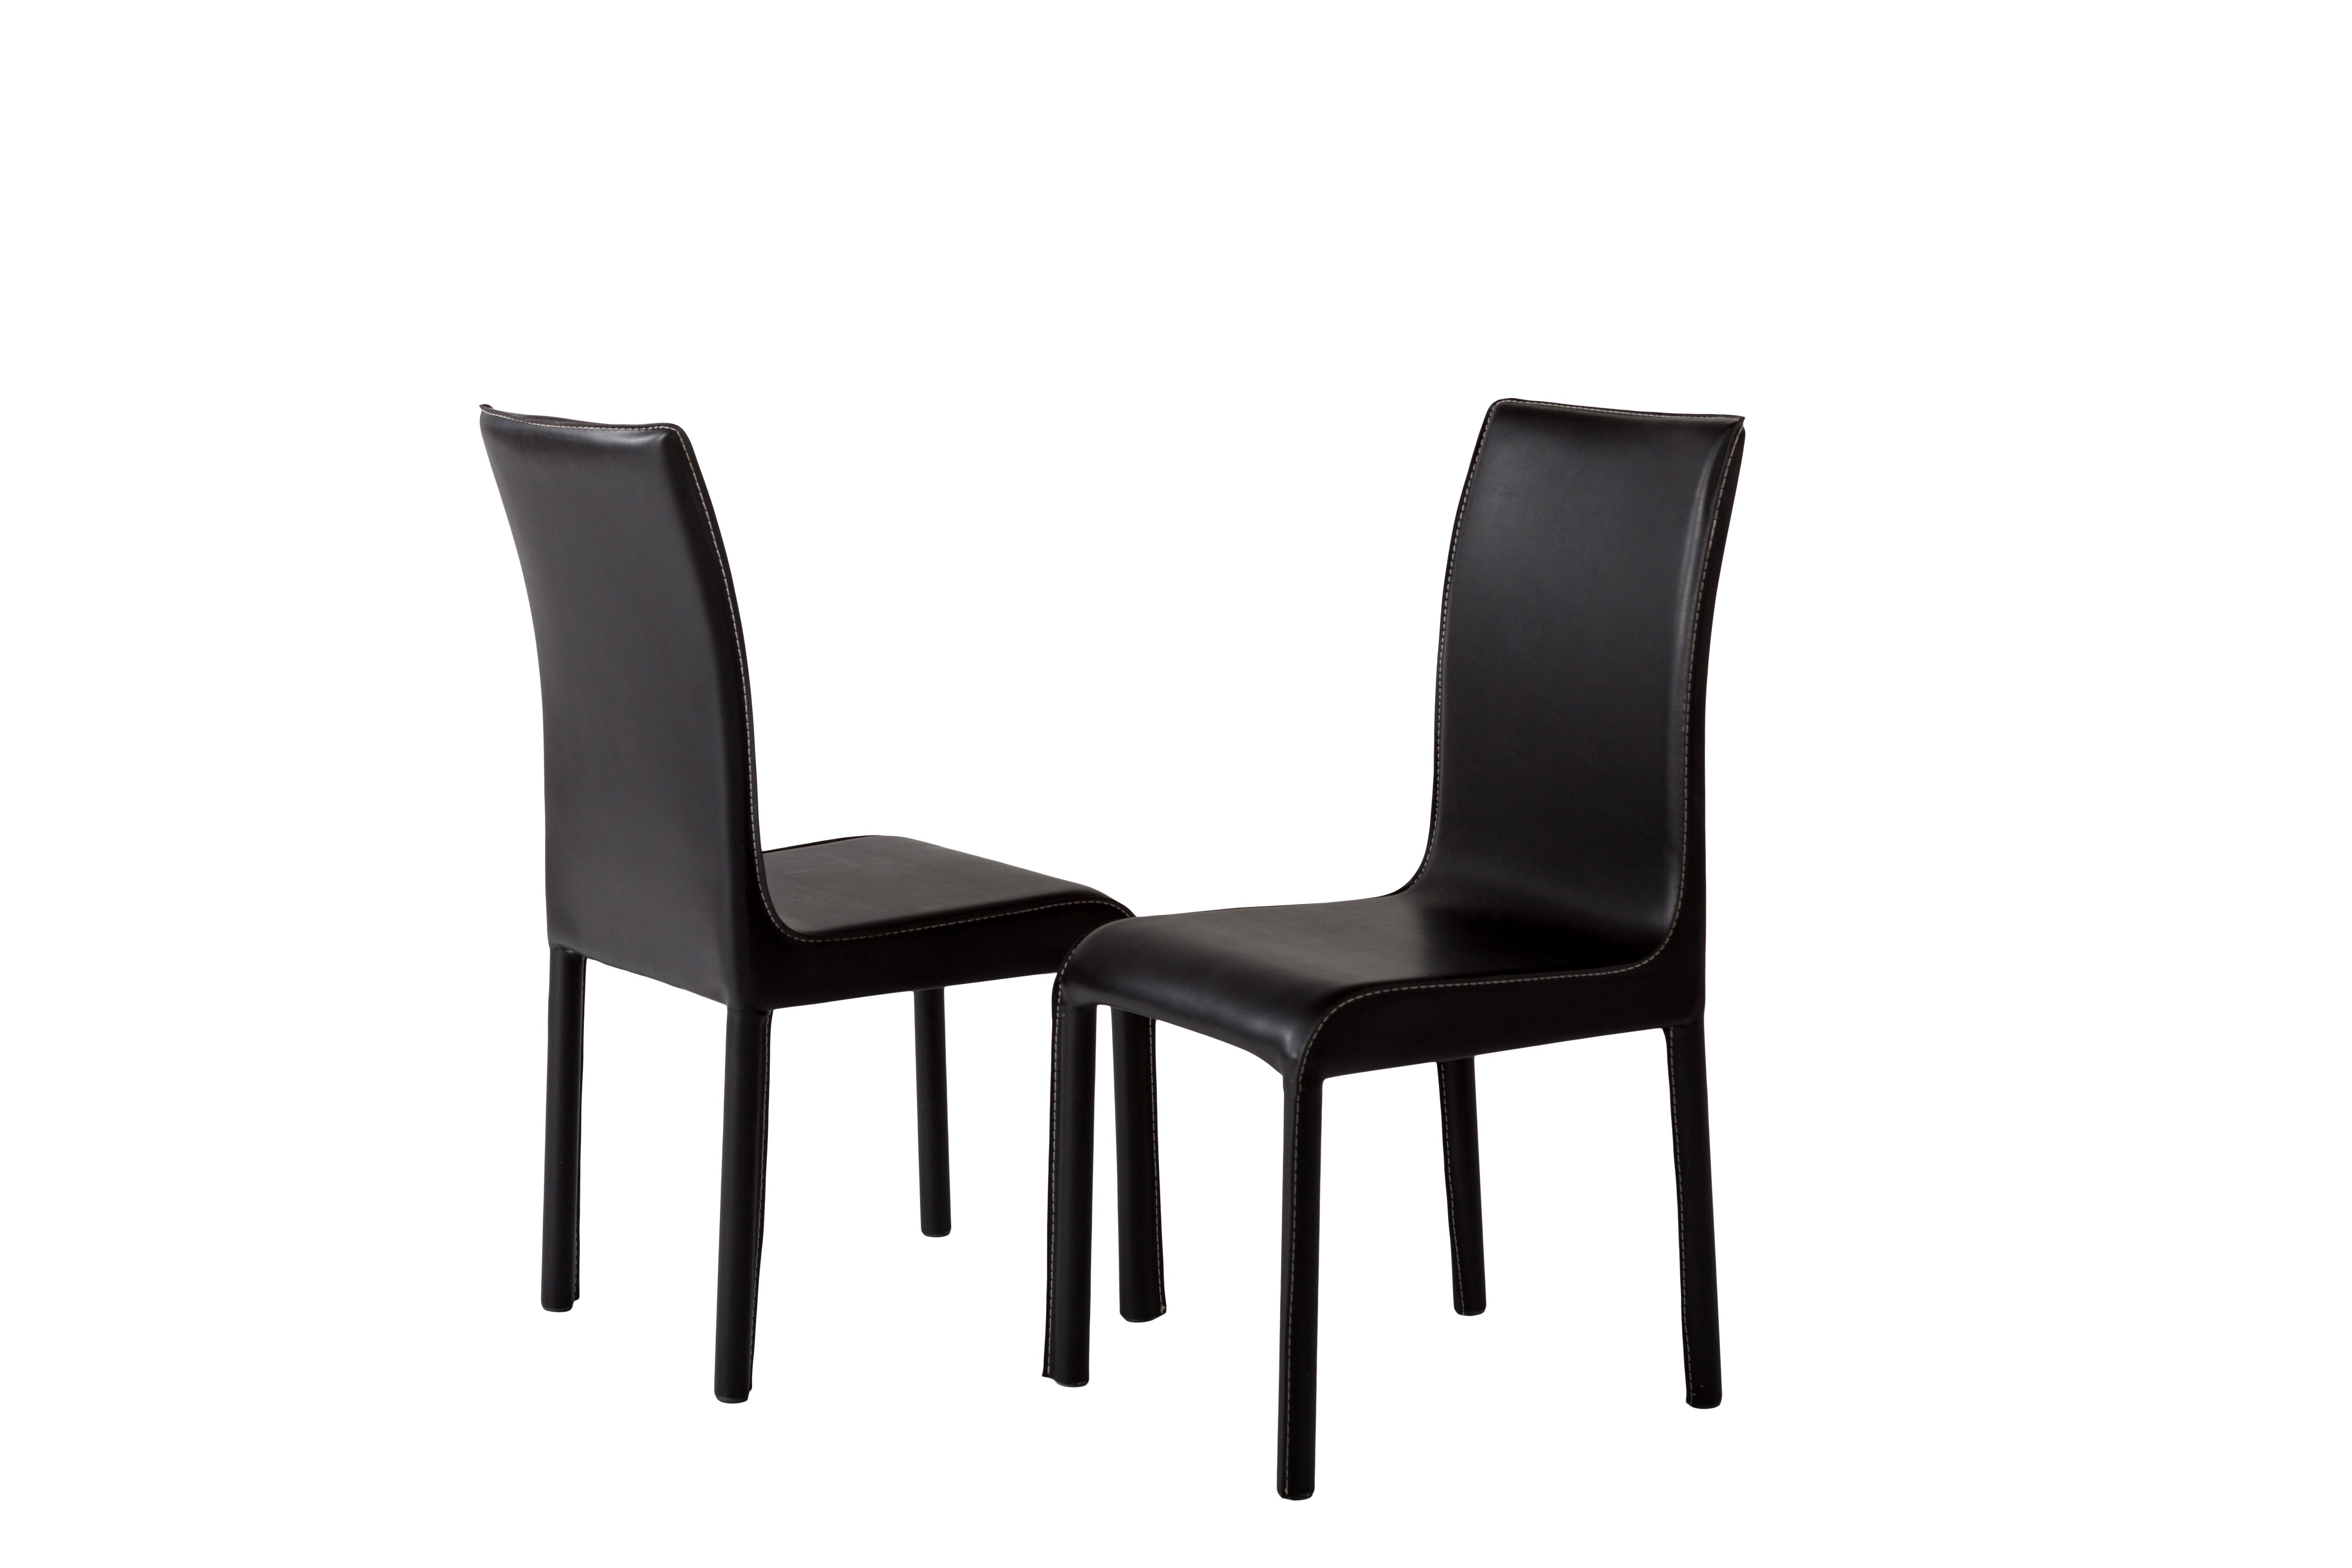 

    
At Home USA Swansea Black Dining Chair Set 6Pcs Contemporary
